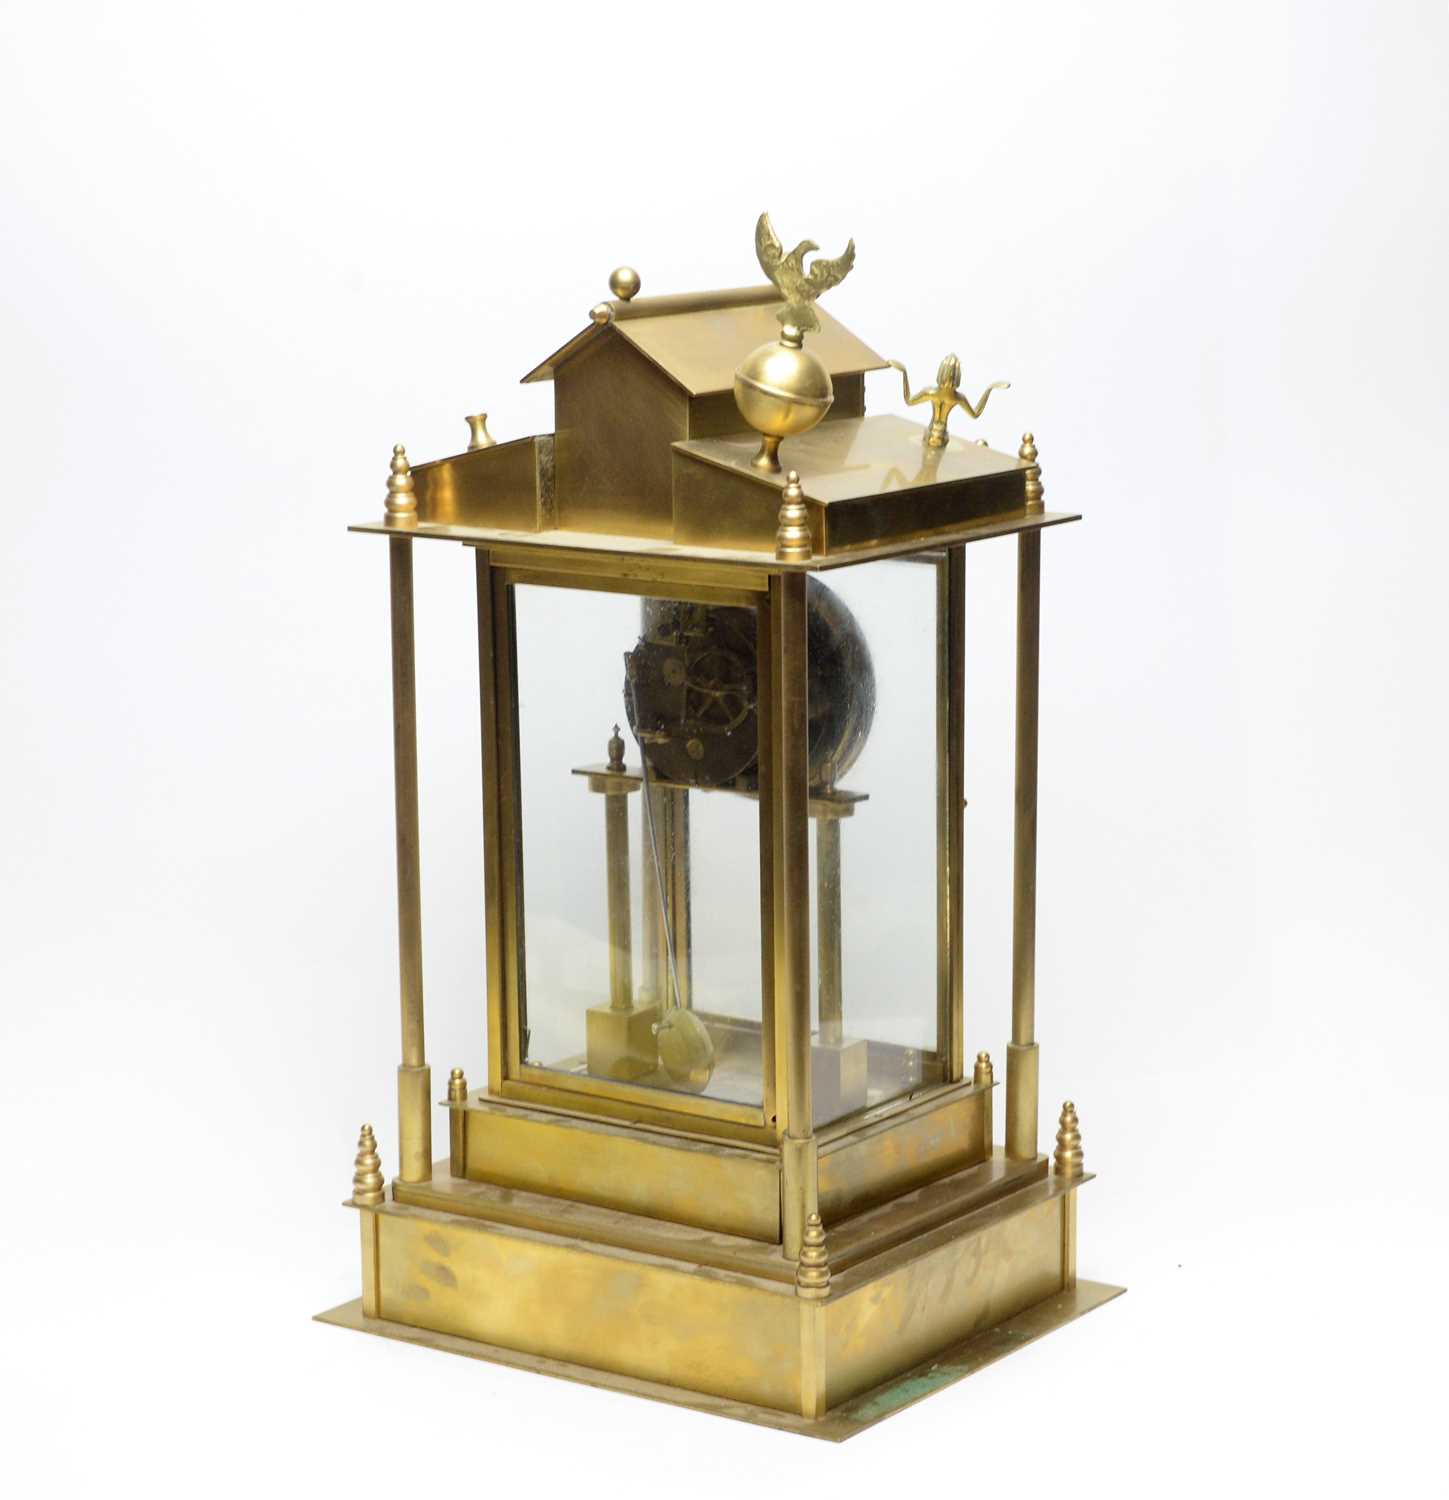 S Marti & Cie: a large and impressive French gilt four-glass mantel clock - Image 6 of 15